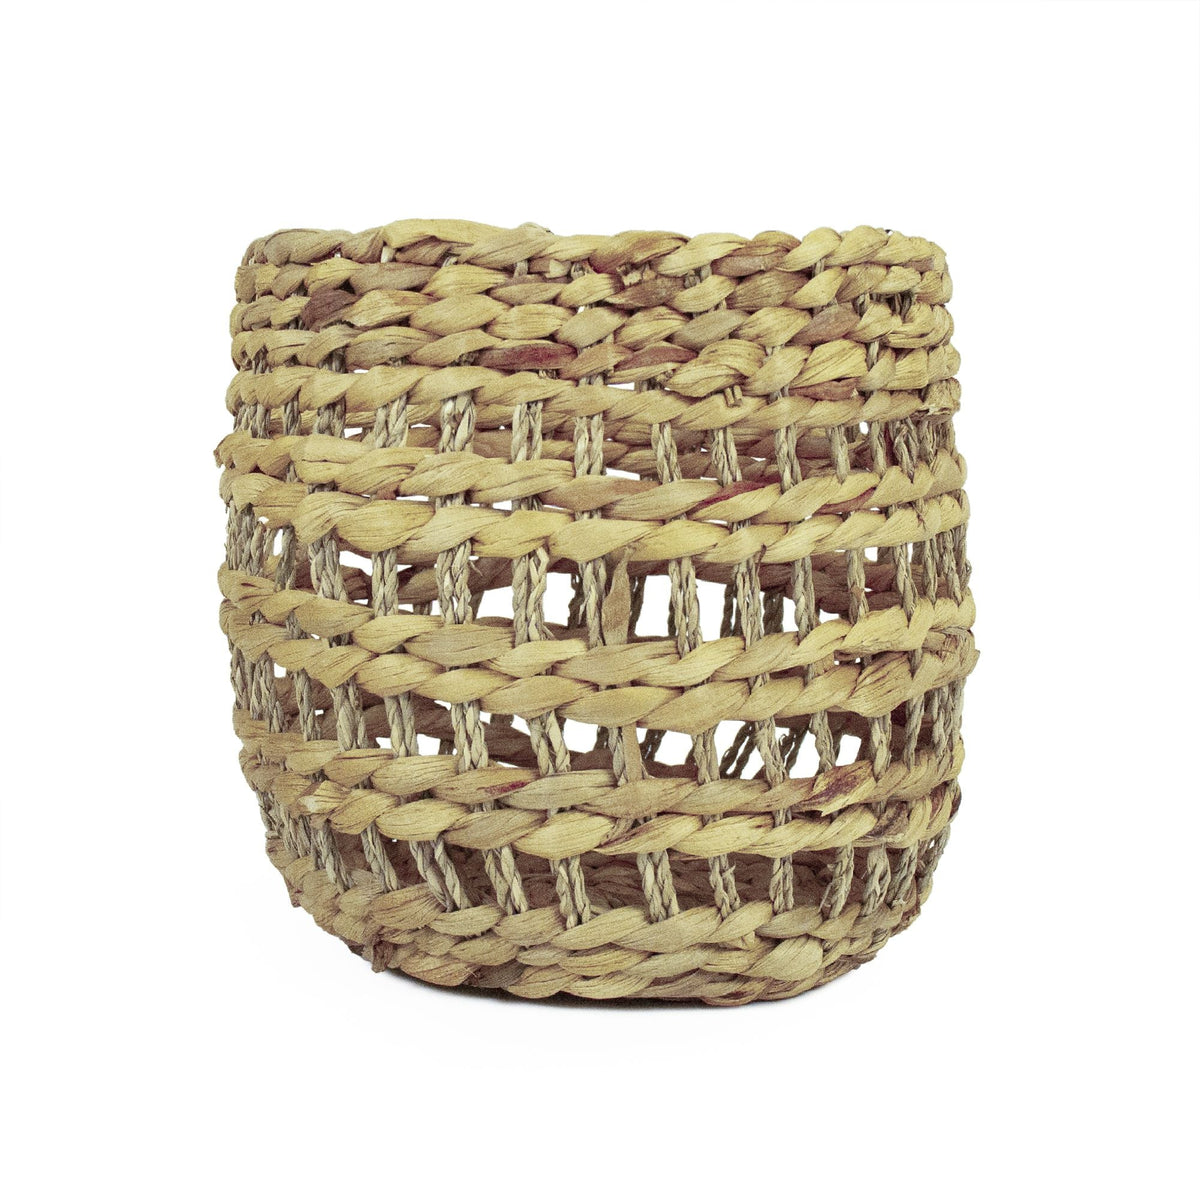 Woven Basket Small by Zentique